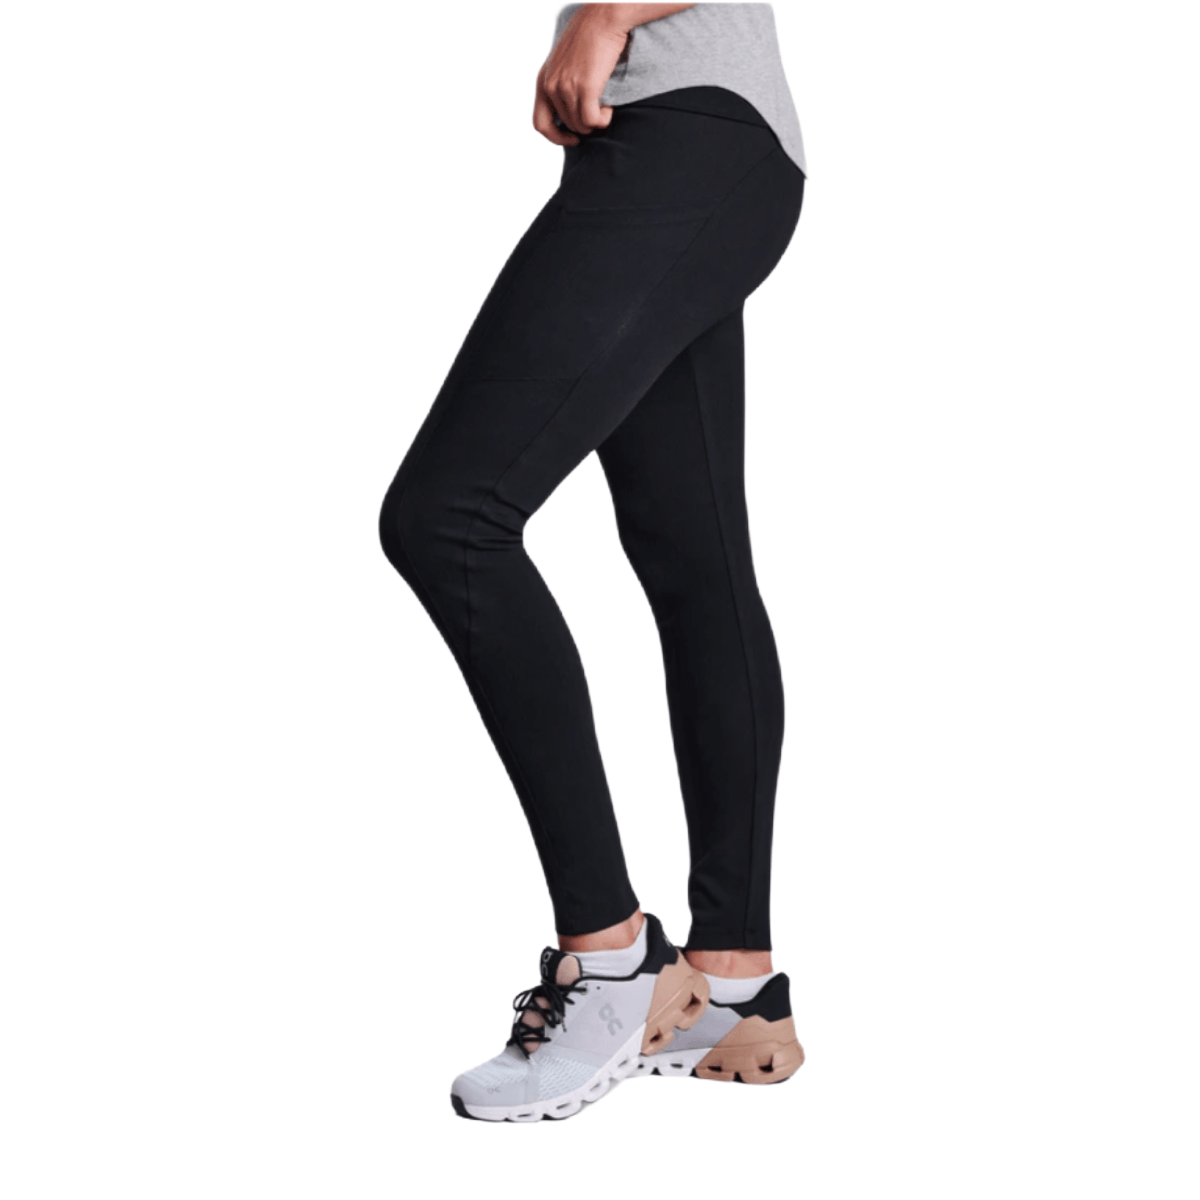 The North Face Motivation High-Rise 7/8 Pocket Tight - Women's 